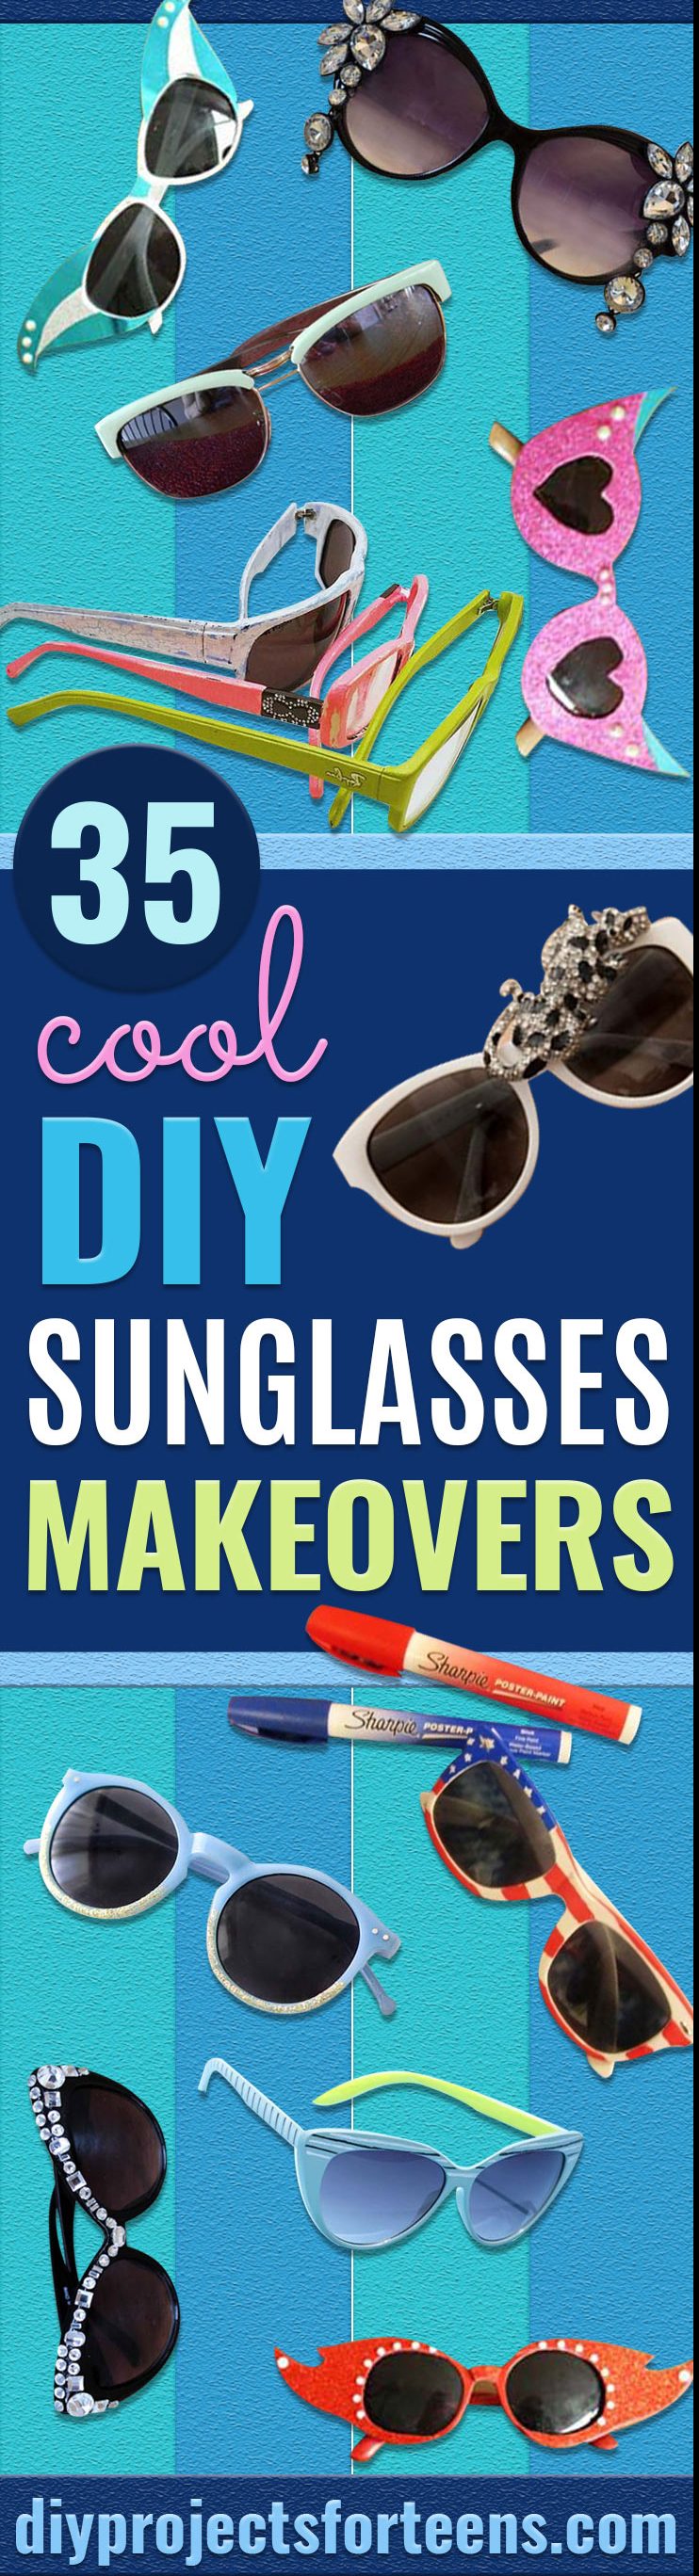 DIY Sunglasses Makeovers - Fun Ways to Decorate and Embellish Sunglasses - Embroider, Paint, Add Jewels and Glitter to Your Shades - Cheap and Easy Projects and Crafts for Teens